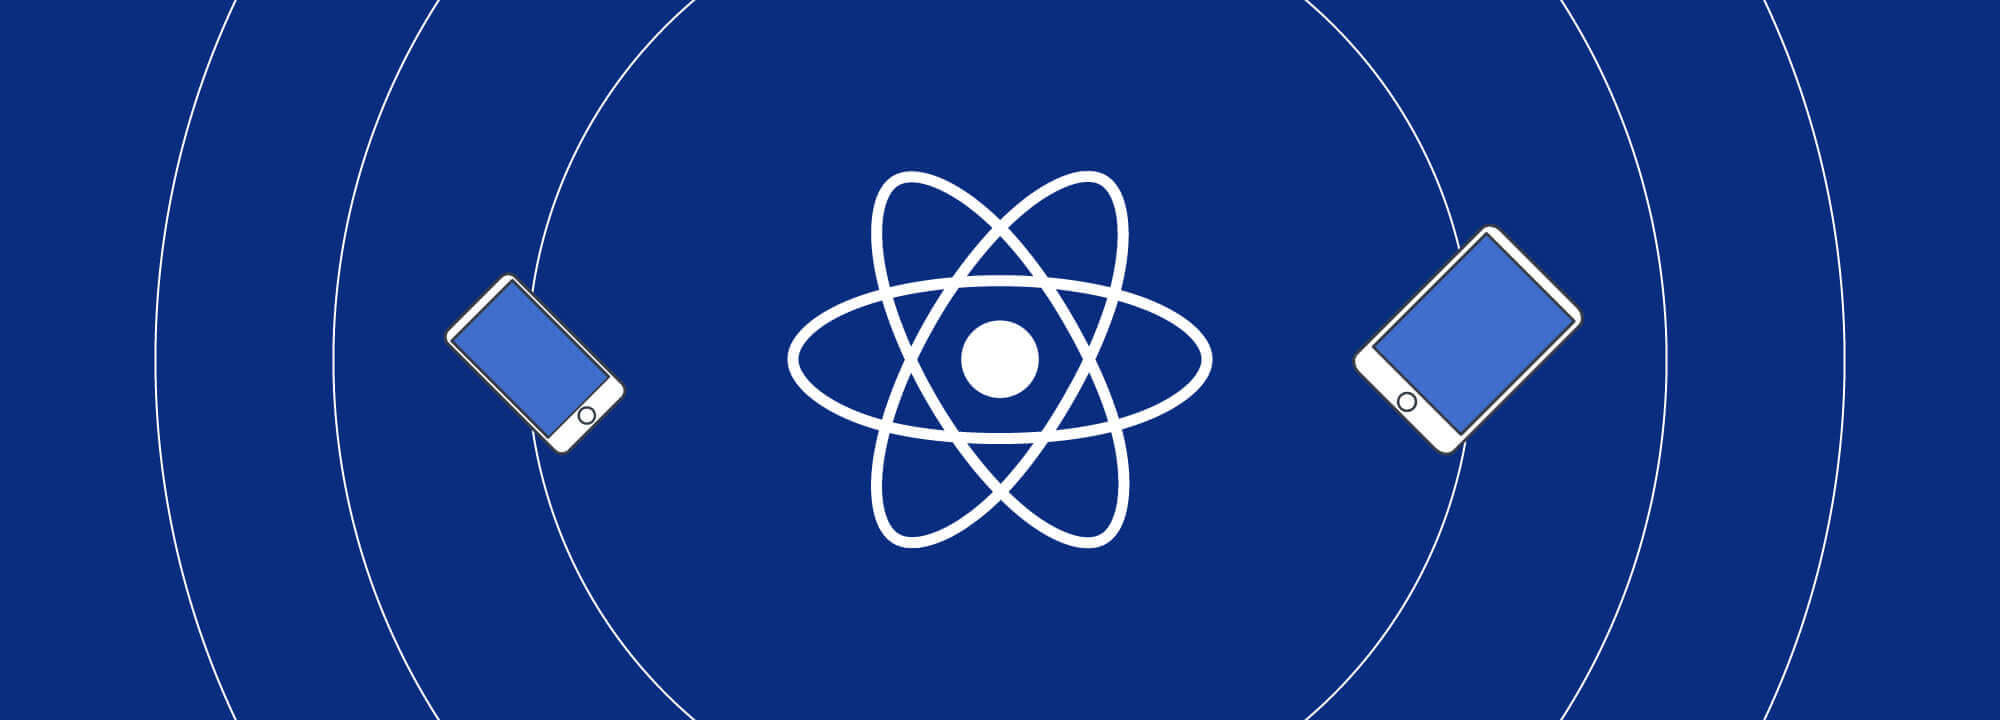 Learning React Native for building Native iOS and Android Apps